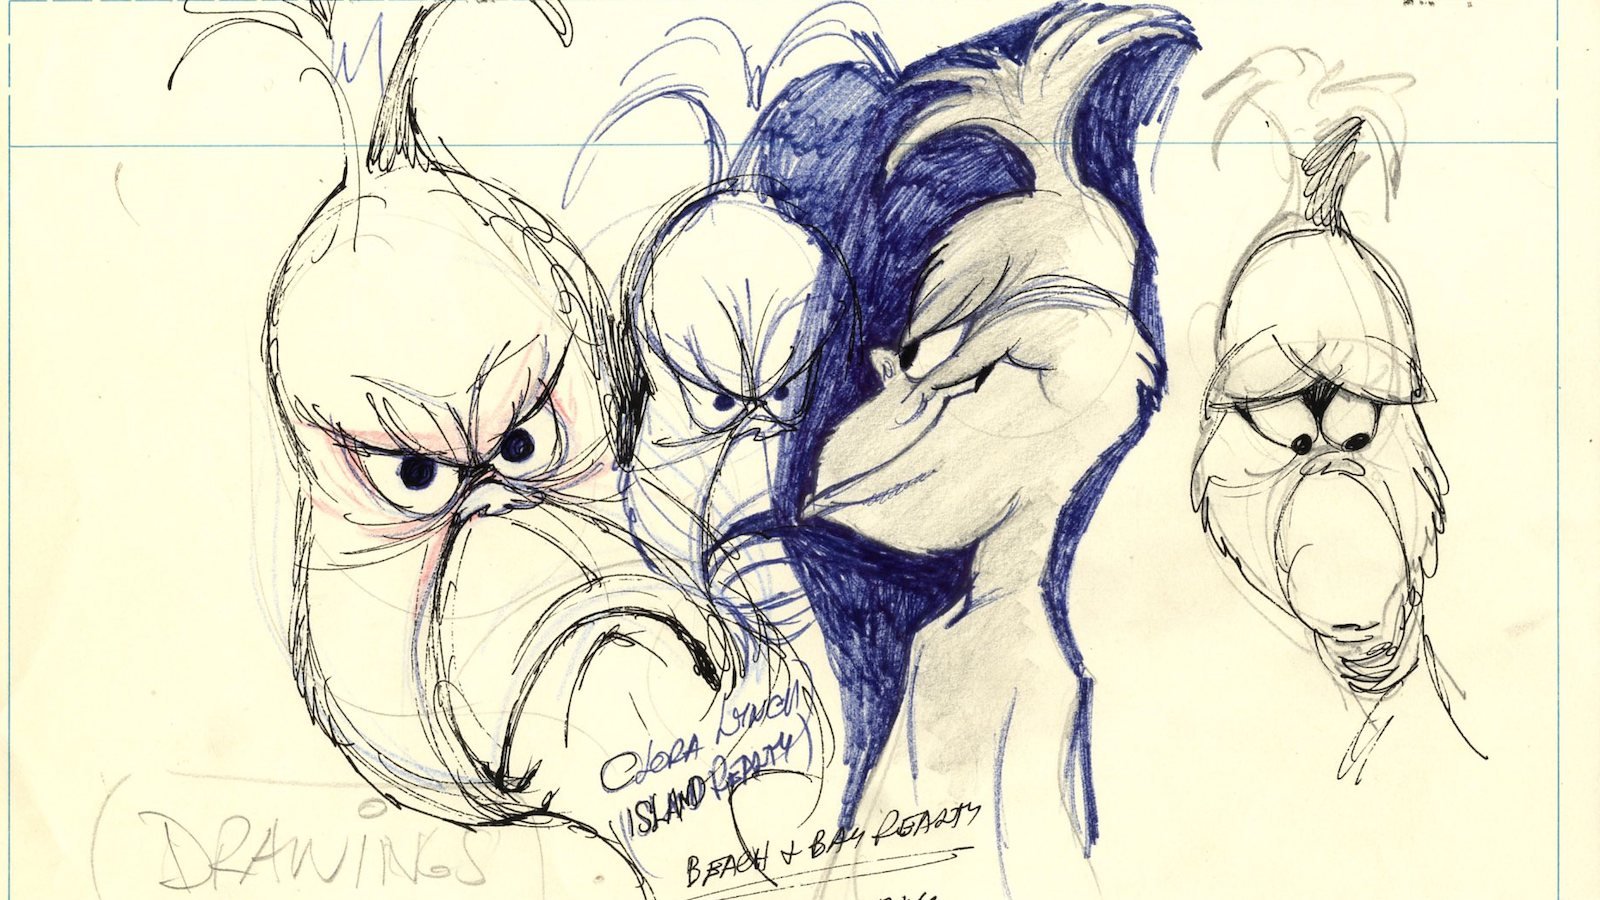 Four sketches of the Grinch animated character in black and white